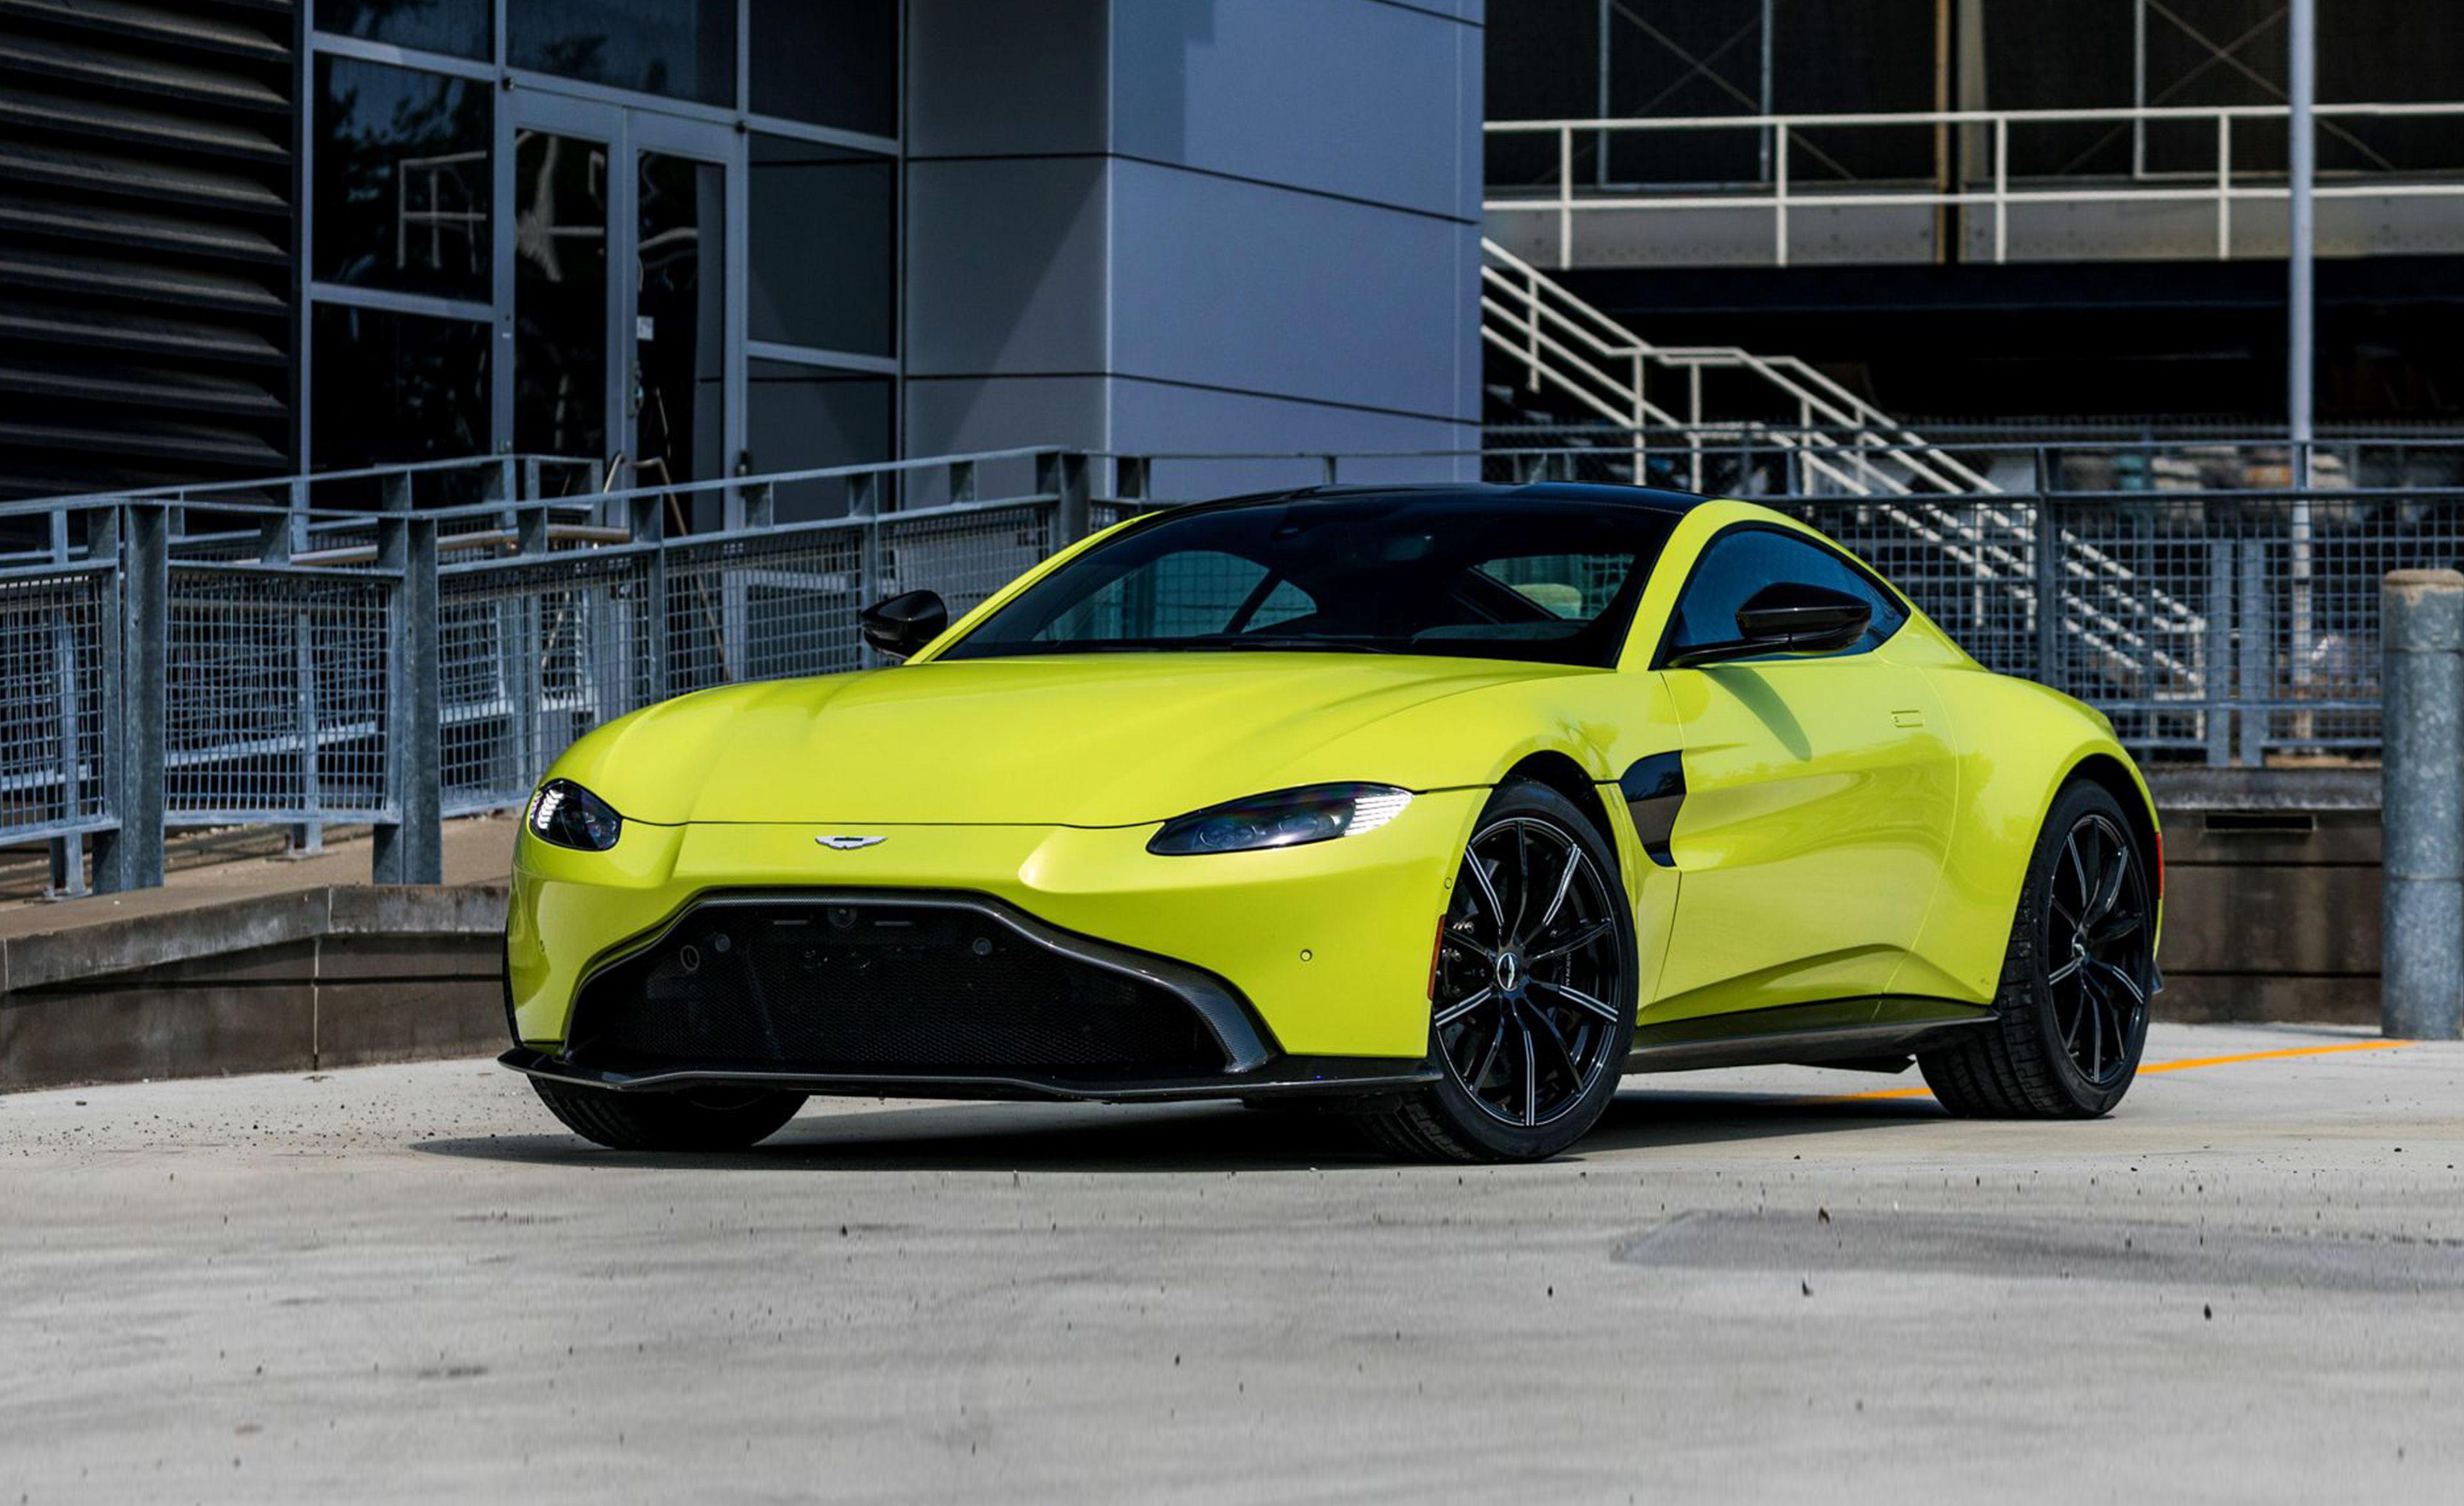 gård storm Milliard 2019 Aston Martin Vantage Review, Pricing, and Specs